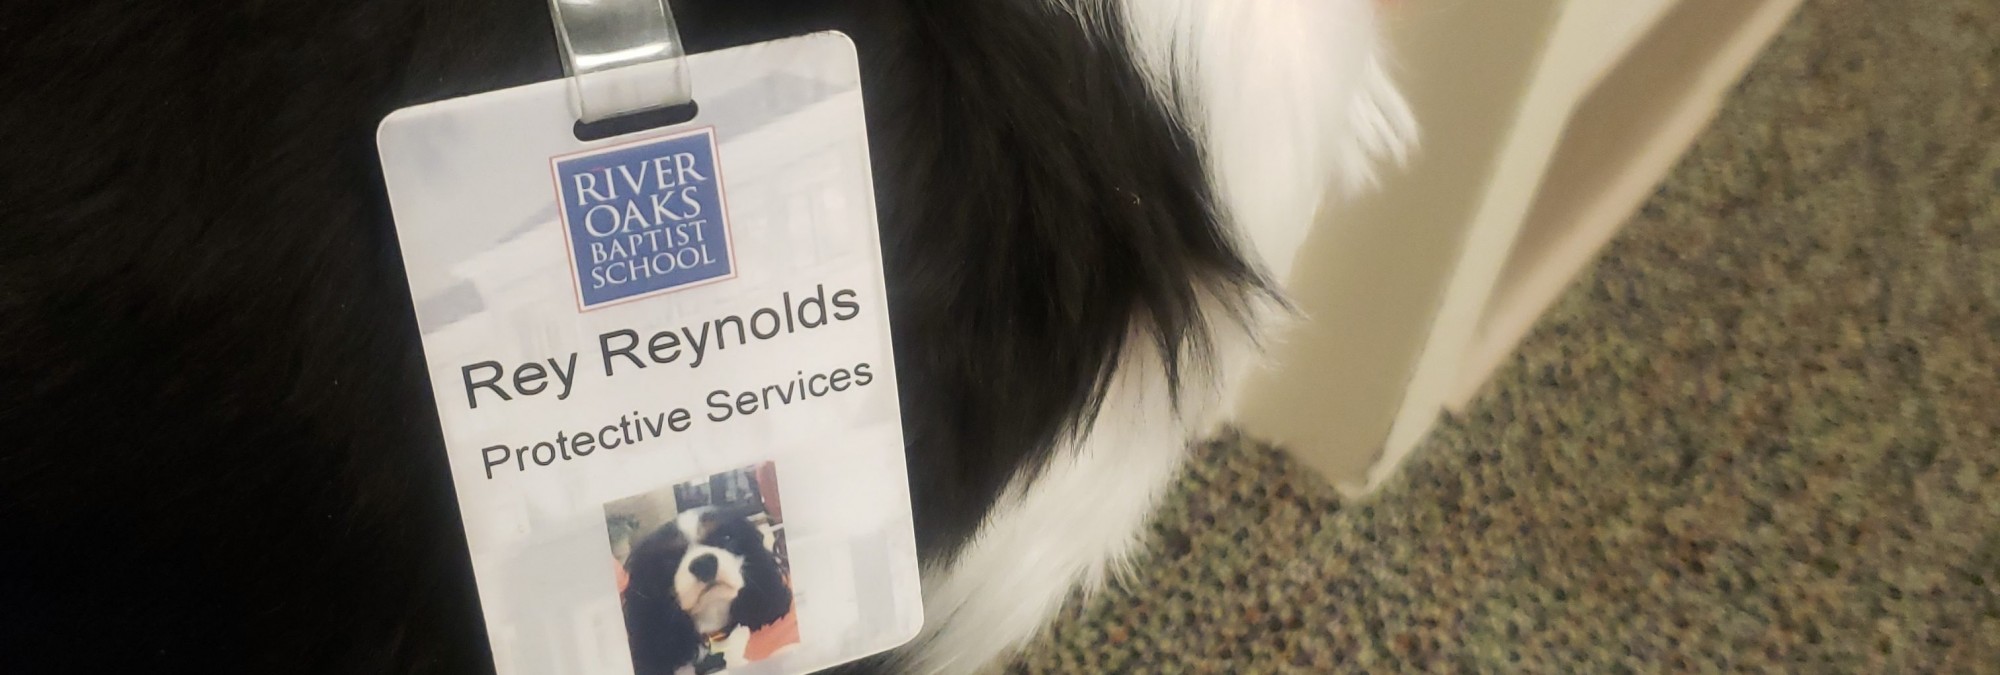 A black and white dog named Rey Reynolds with a River Oaks Baptist School Protective Services tag